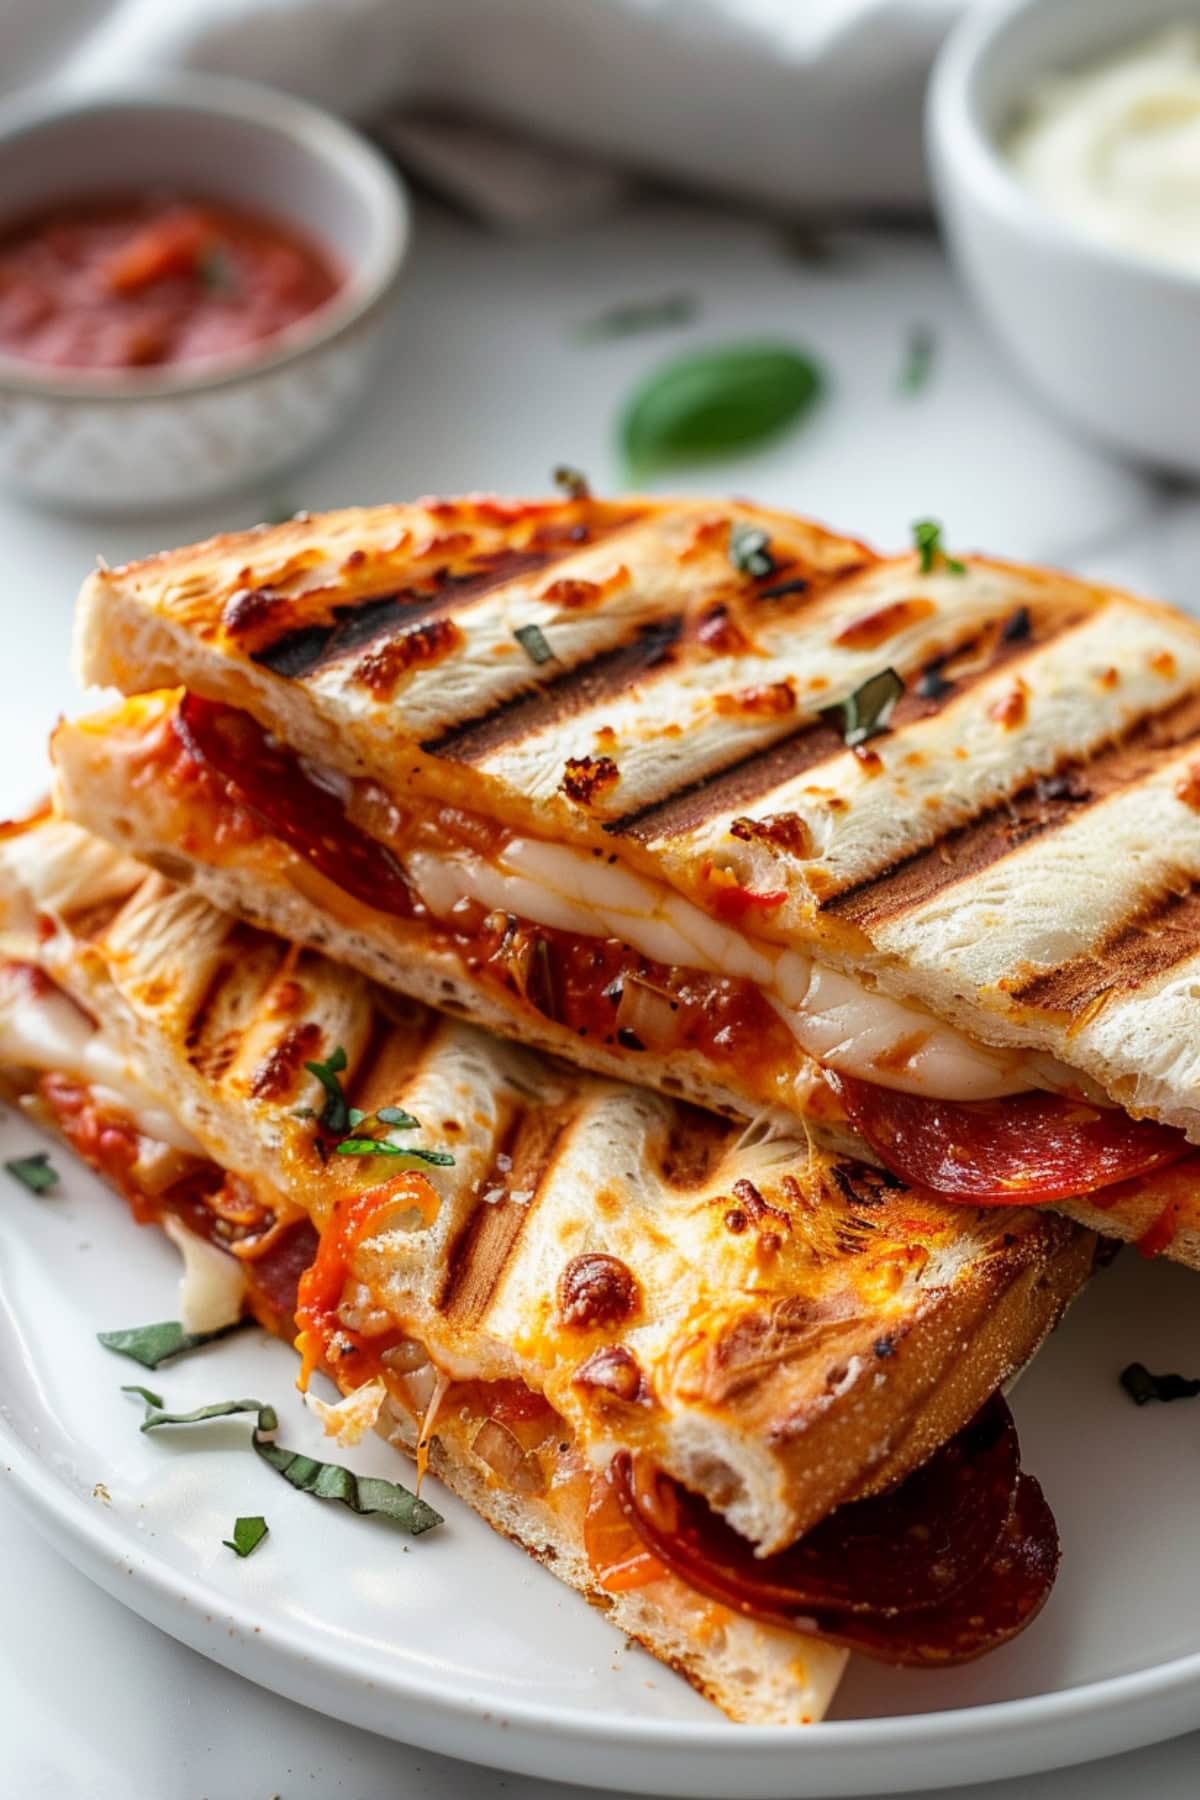 Gooey pizza panini with melted mozzarella and pepperoni in grilled ciabatta bread rolls